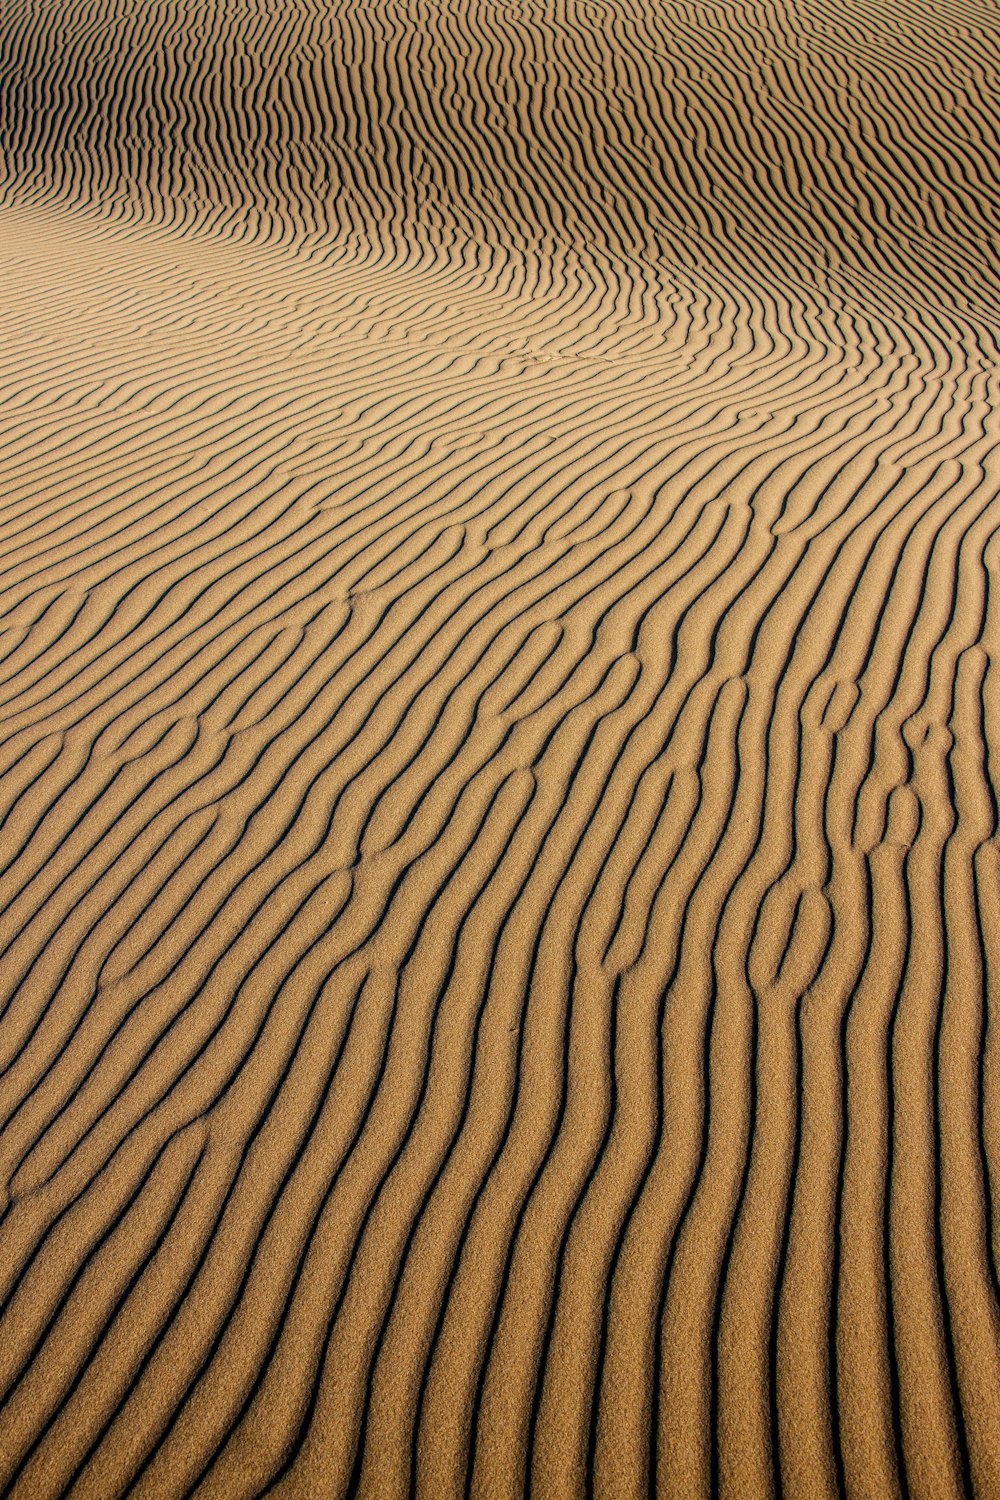 a sandy area with wavy lines in the sand